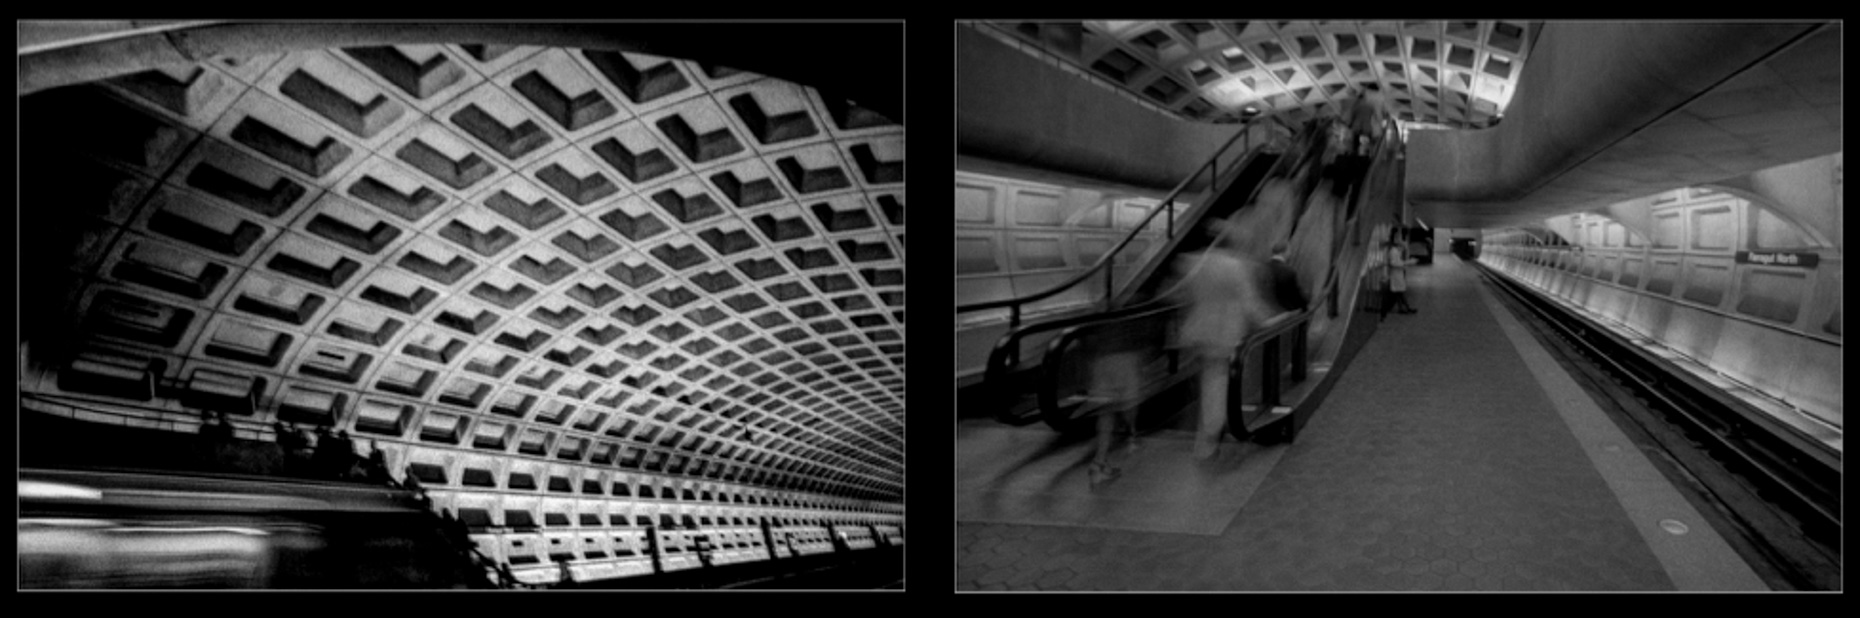 "D.C. Subway. 1977,  Contemporary Art Photography, Black & White Photography, Photo-Sequence, Diptych Photography, Visual Memories Series